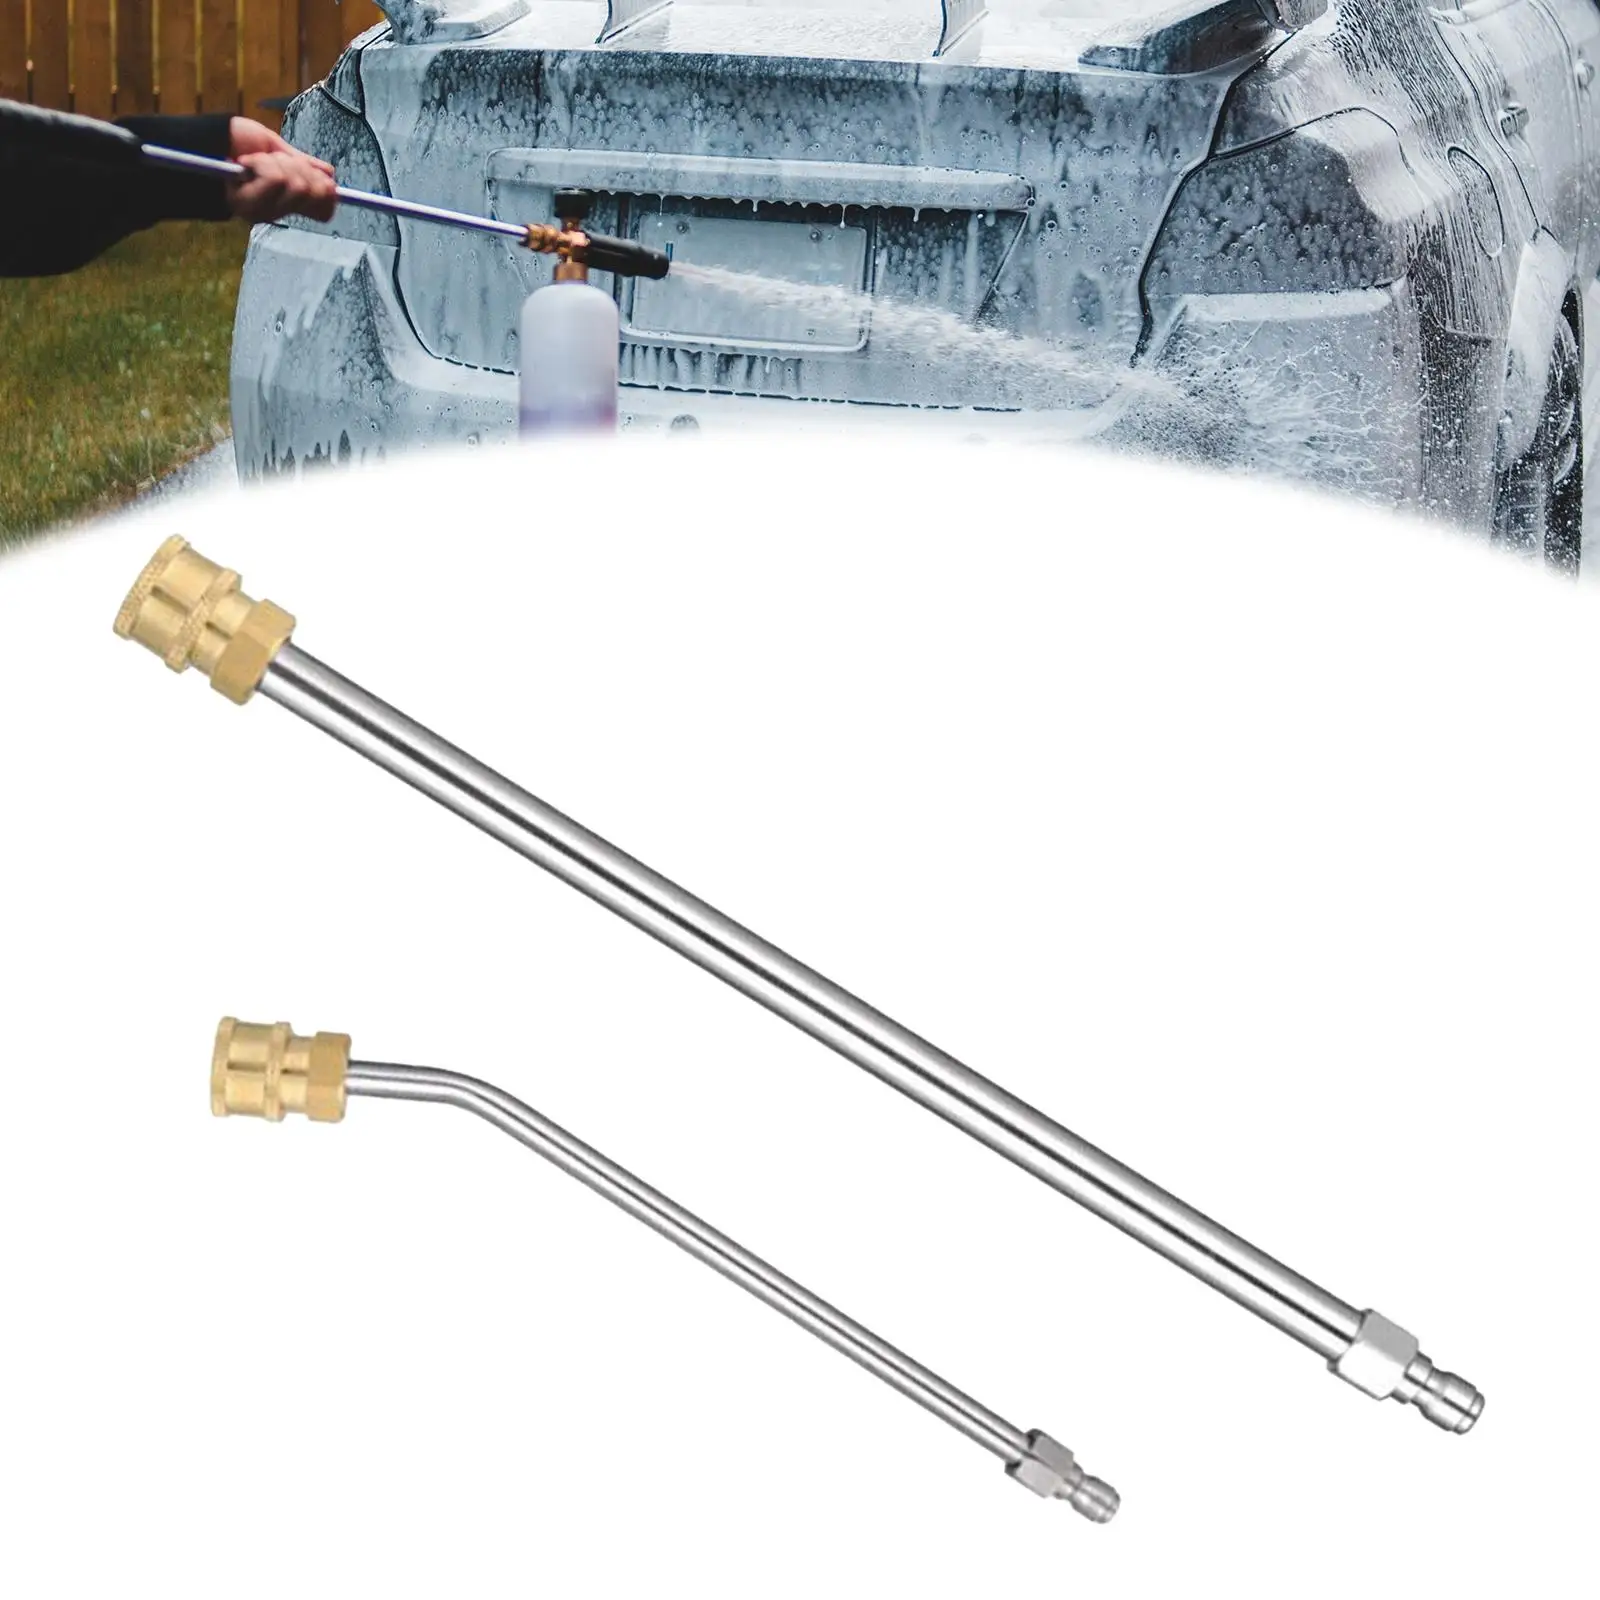 2Pcs Washer Extension Wands 1/4Quick Connect for Driveway Household Patio